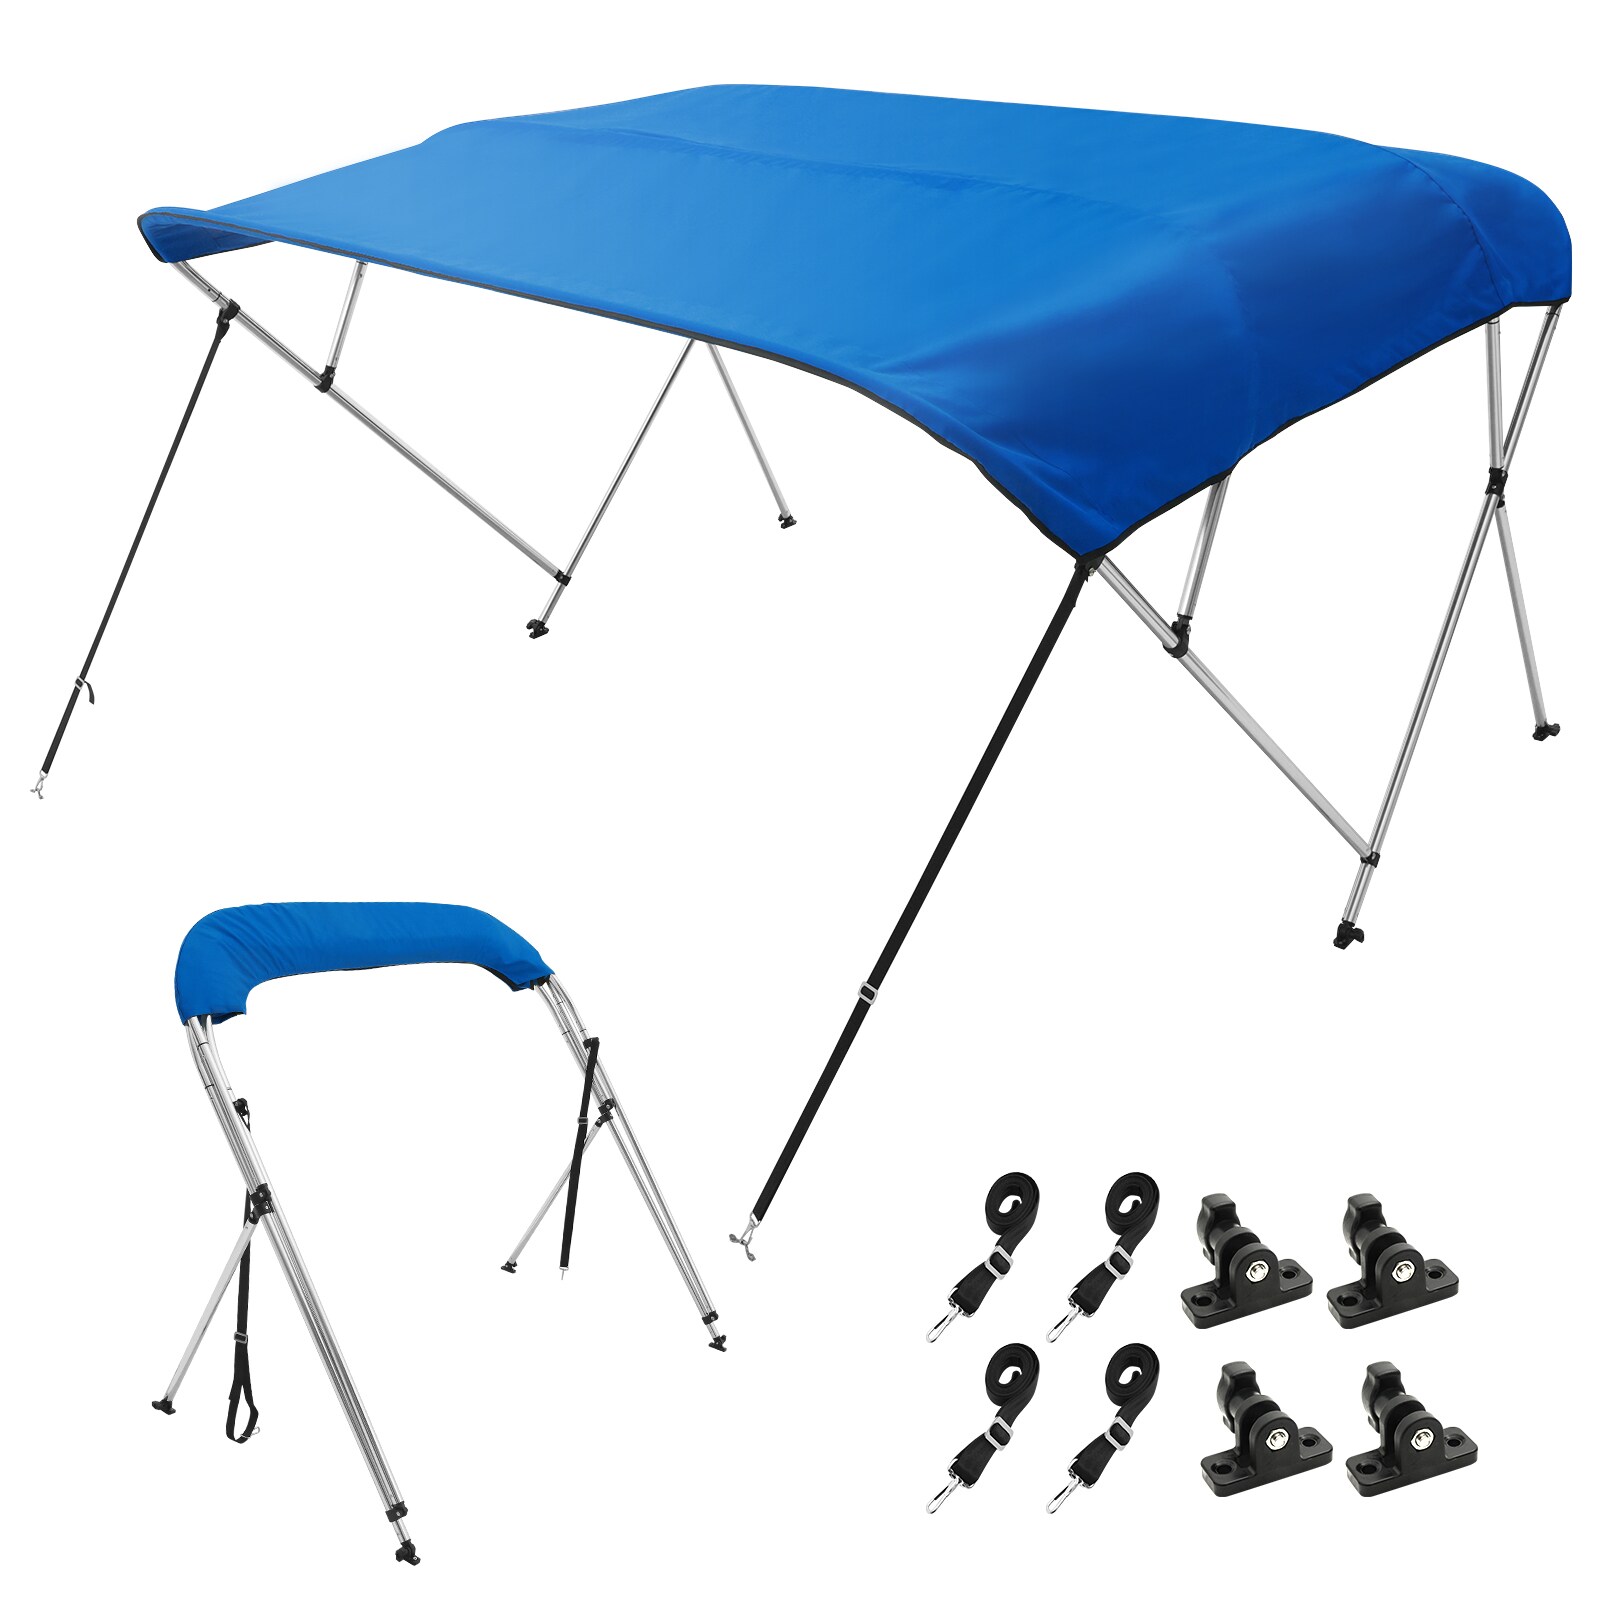 VEVOR 4 Bow Bimini Top Boat Cover, 900d Polyester Canopy with 1-second  Aluminum Alloy Frame, Waterproof and Sun Shade, Includes Storage Boot, 2  Support Poles, 4 Strap in the Boat Covers 